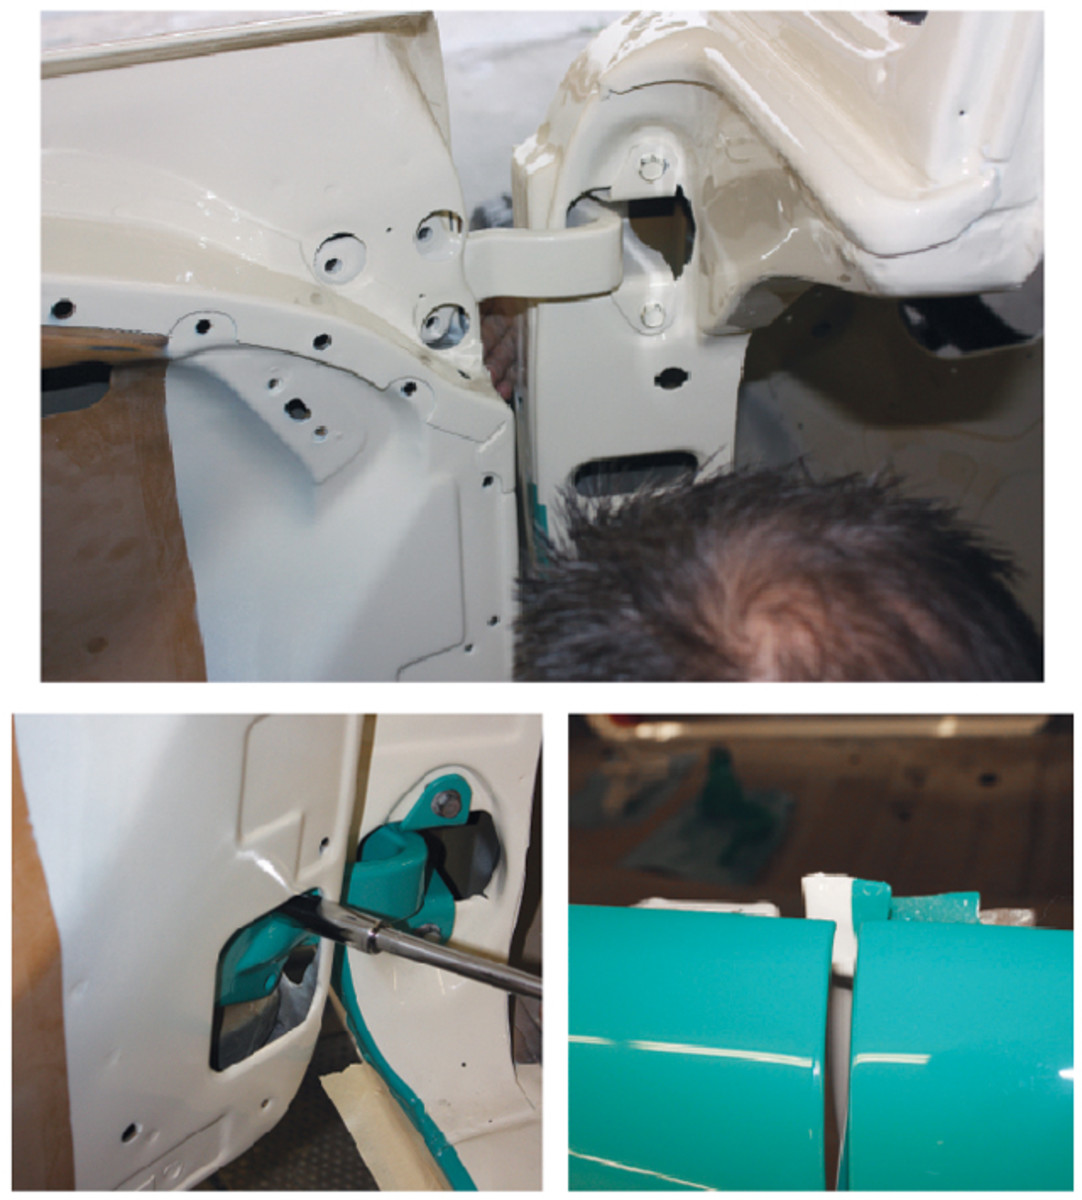 After the top hinge is set, the bottom hinge is installed in a similar fashion. The goal at this point it to hang the door slightly high in the back corner — at least 1/4 inch higher than flush with the top of the rear quarterpanel. The photo at right shows the two edges are even, meaning the door still needs to be adjusted. The weight of the door skin, glass, window regulator and other hardware will drop the door slightly and help even things up.